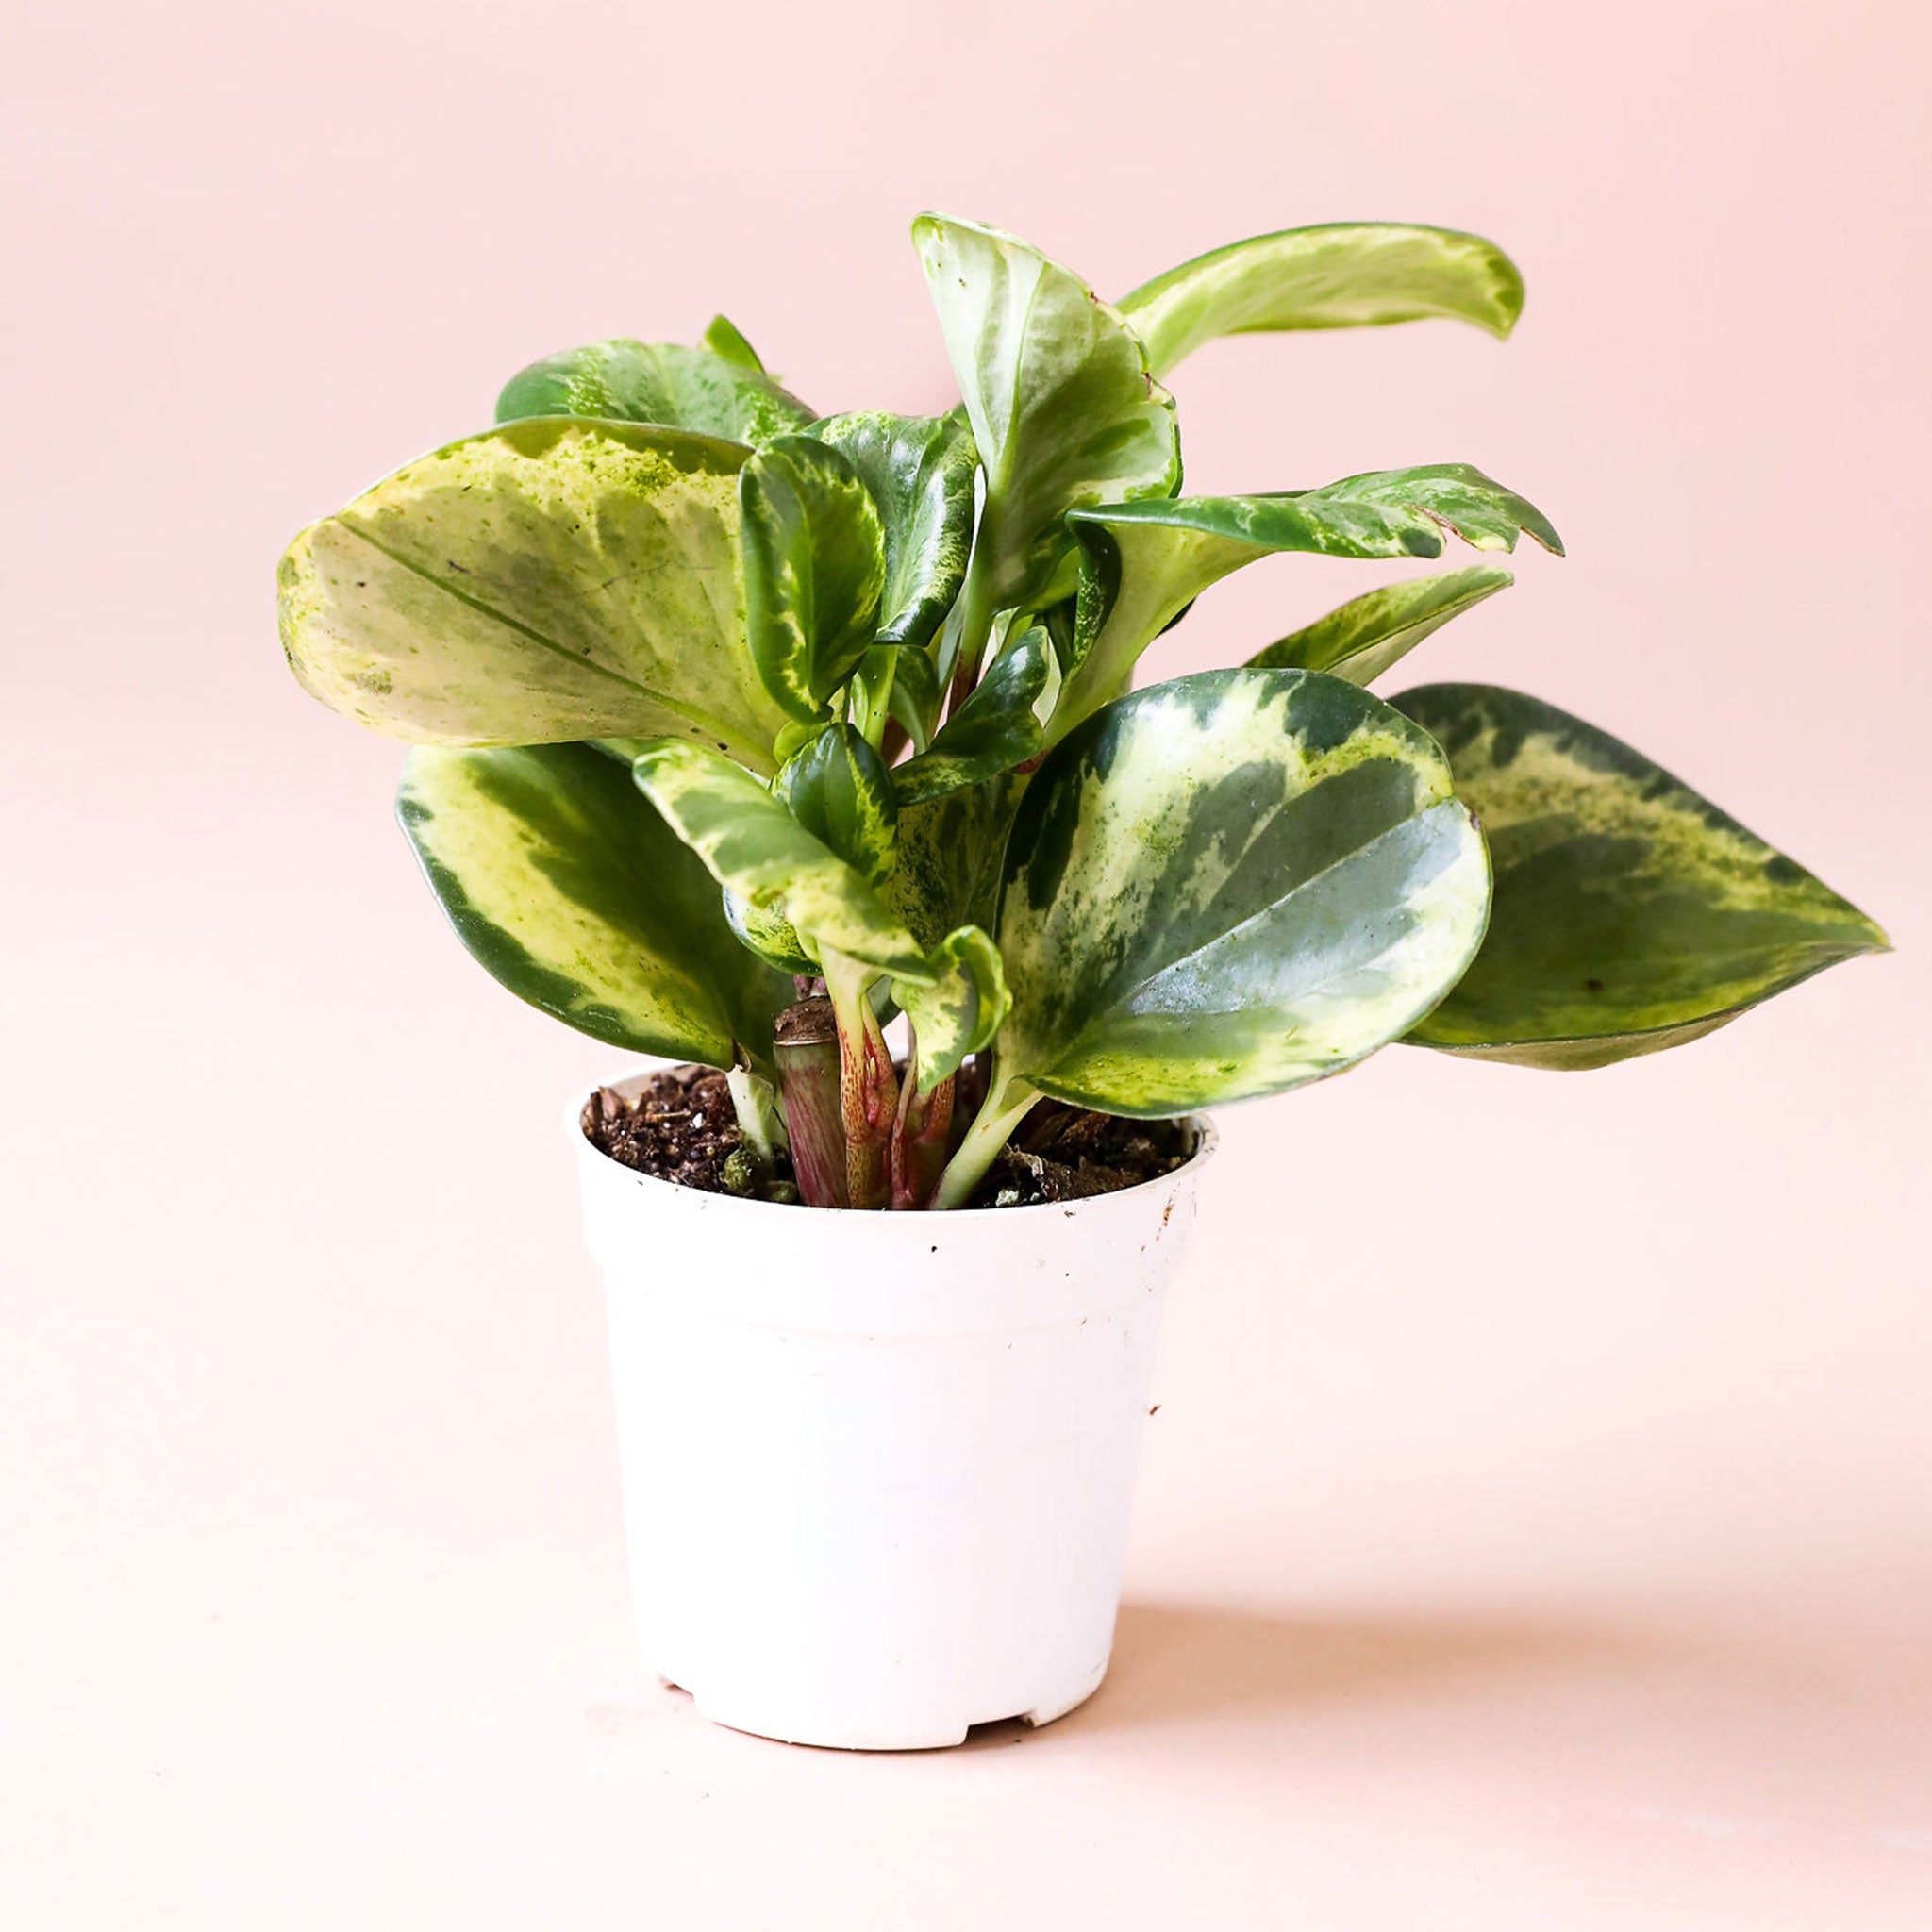 a peperomia pbtusifolia marble with rounded leaves featuring green and yellow marbling.